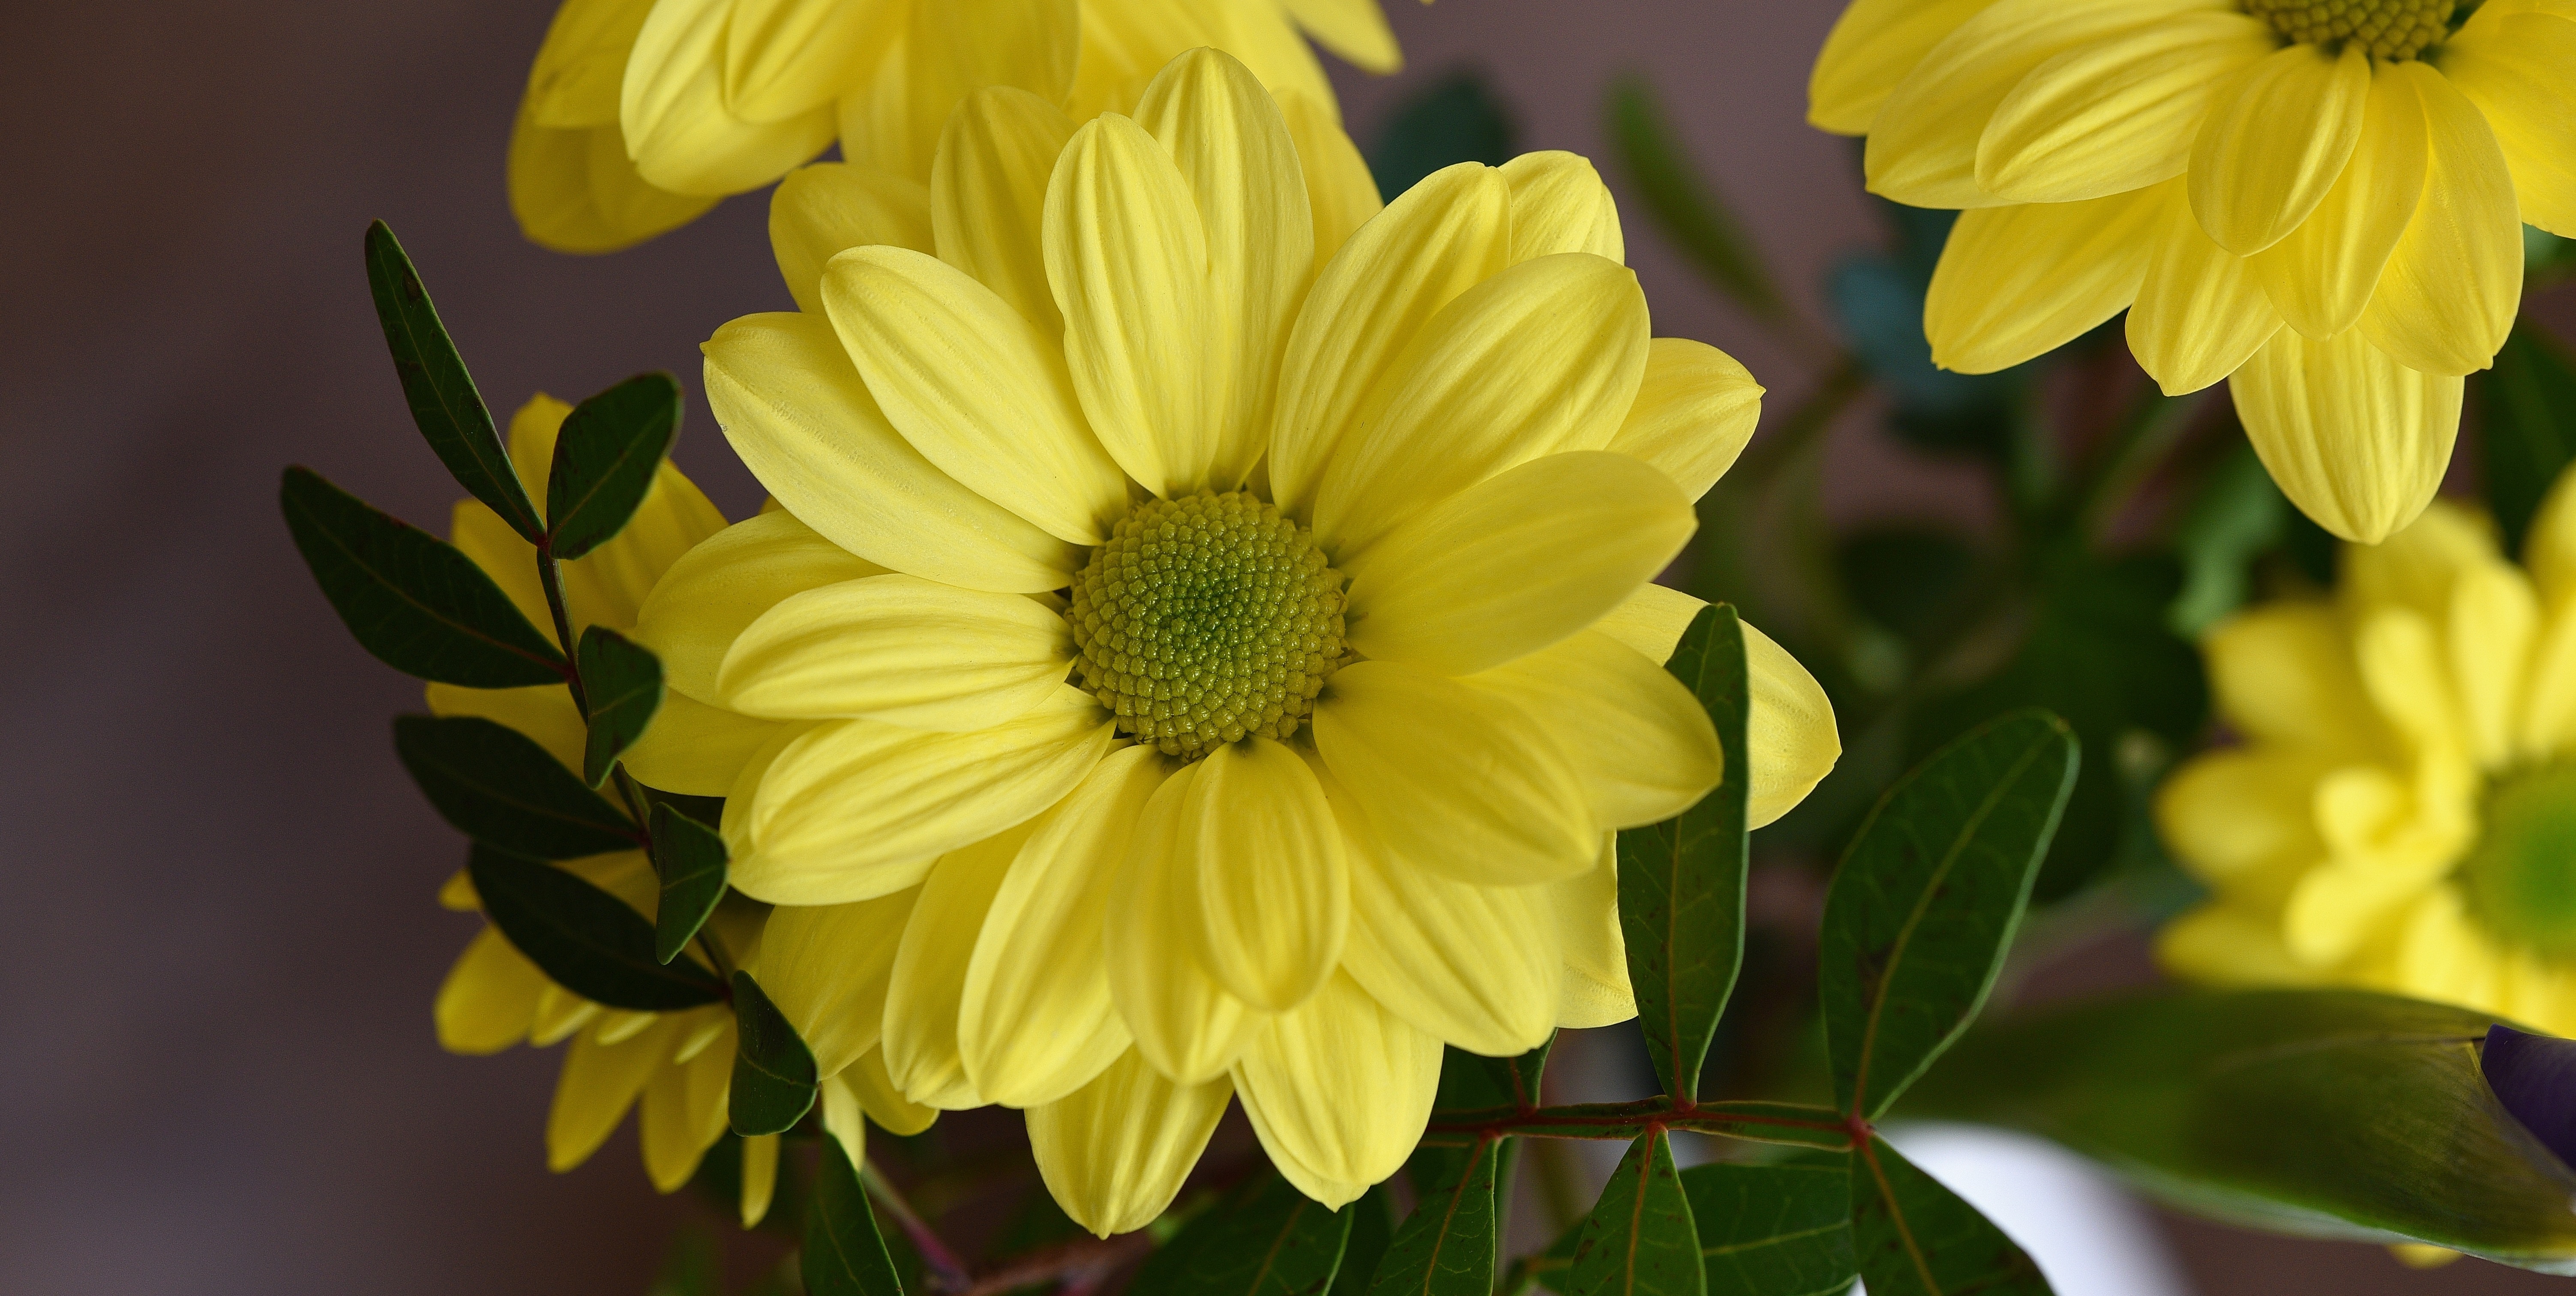 shallow focus photo of yellow flower